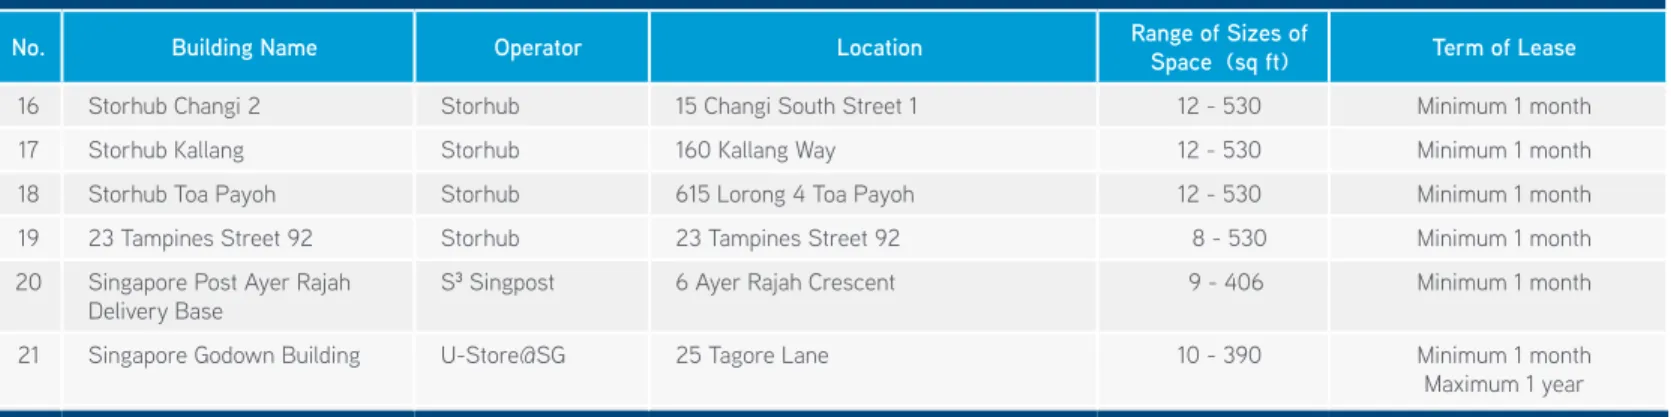 TABLE 1 : LIST OF SELECTED SELF-STORAGE SPACE IN SINGAPORE